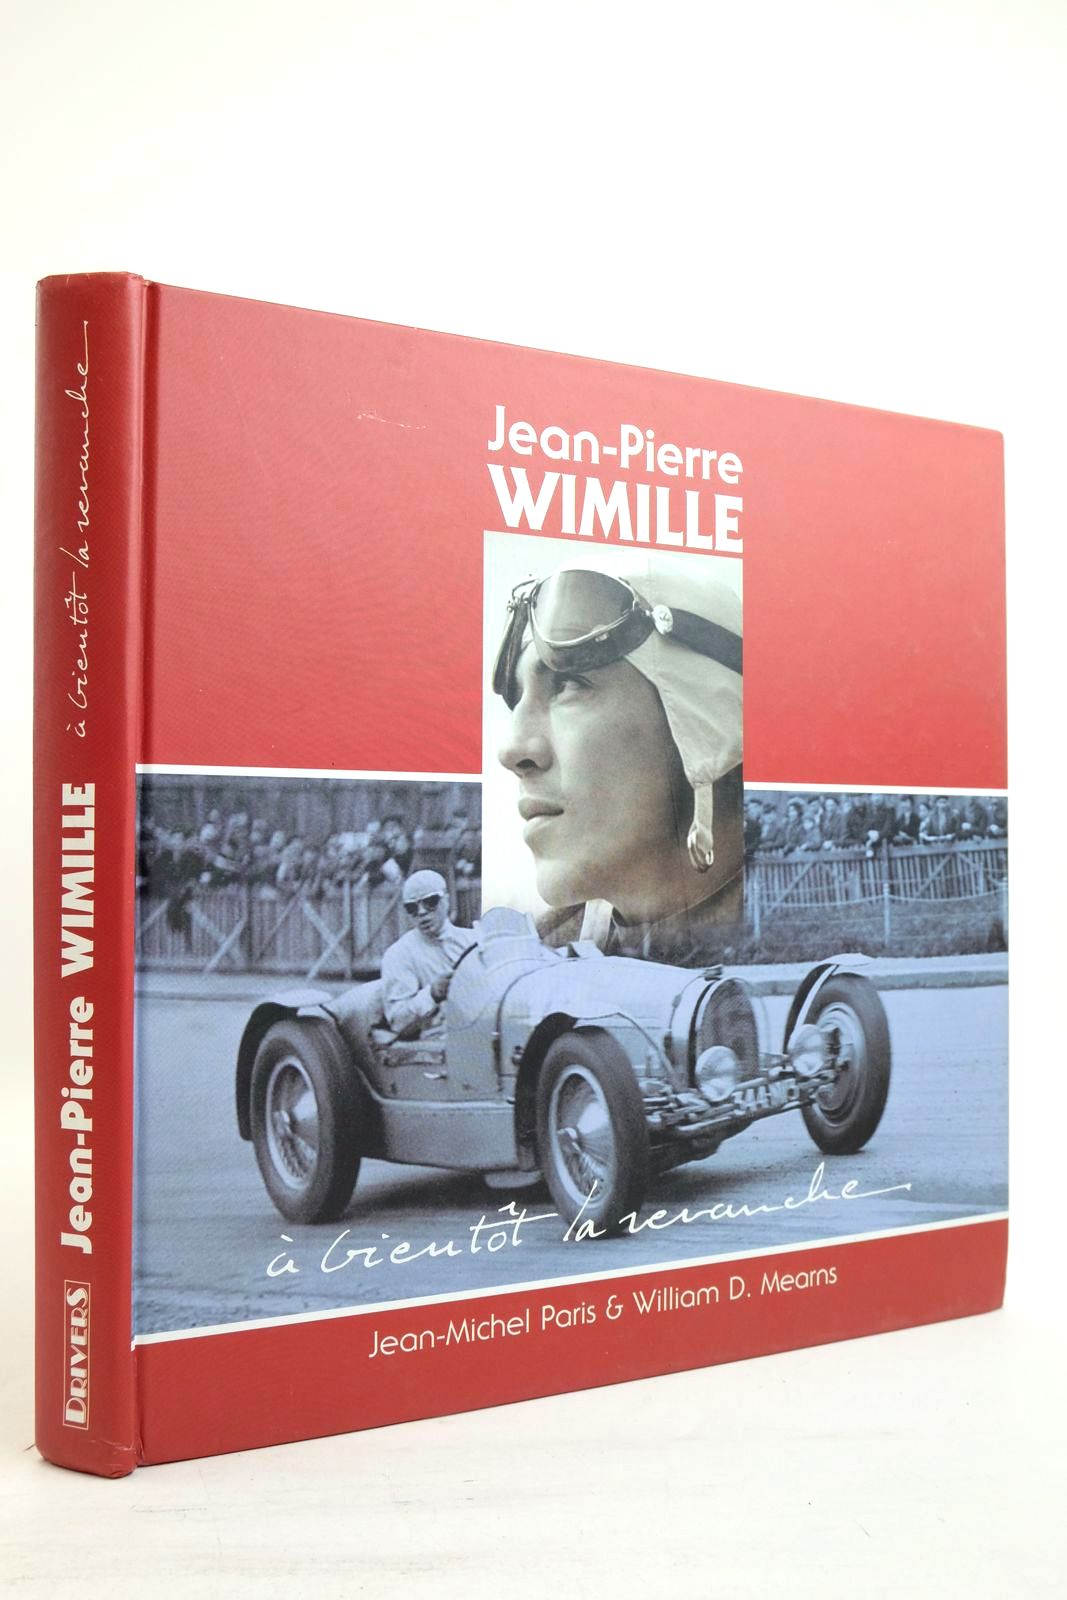 Photo of JEAN-PIERRE WIMILLE: A BIENTOT LA REVANCHE written by Paris, Jean-Michel Mearns, William D. published by Editions Drivers (STOCK CODE: 2134656)  for sale by Stella & Rose's Books